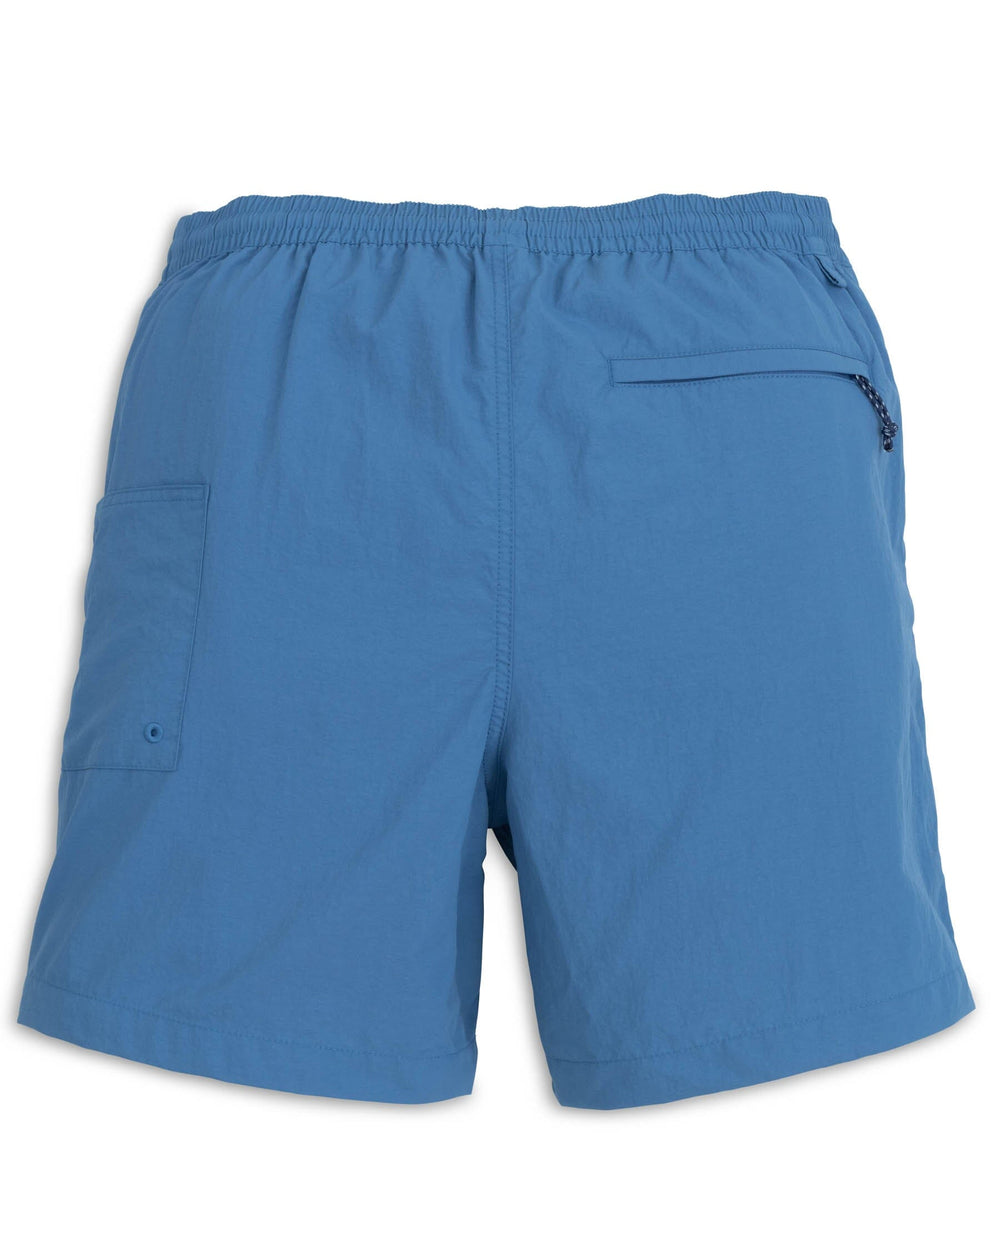 The back view of the Southern Tide Shoreline 6 Inch Short by Southern Tide - Atlantic Blue